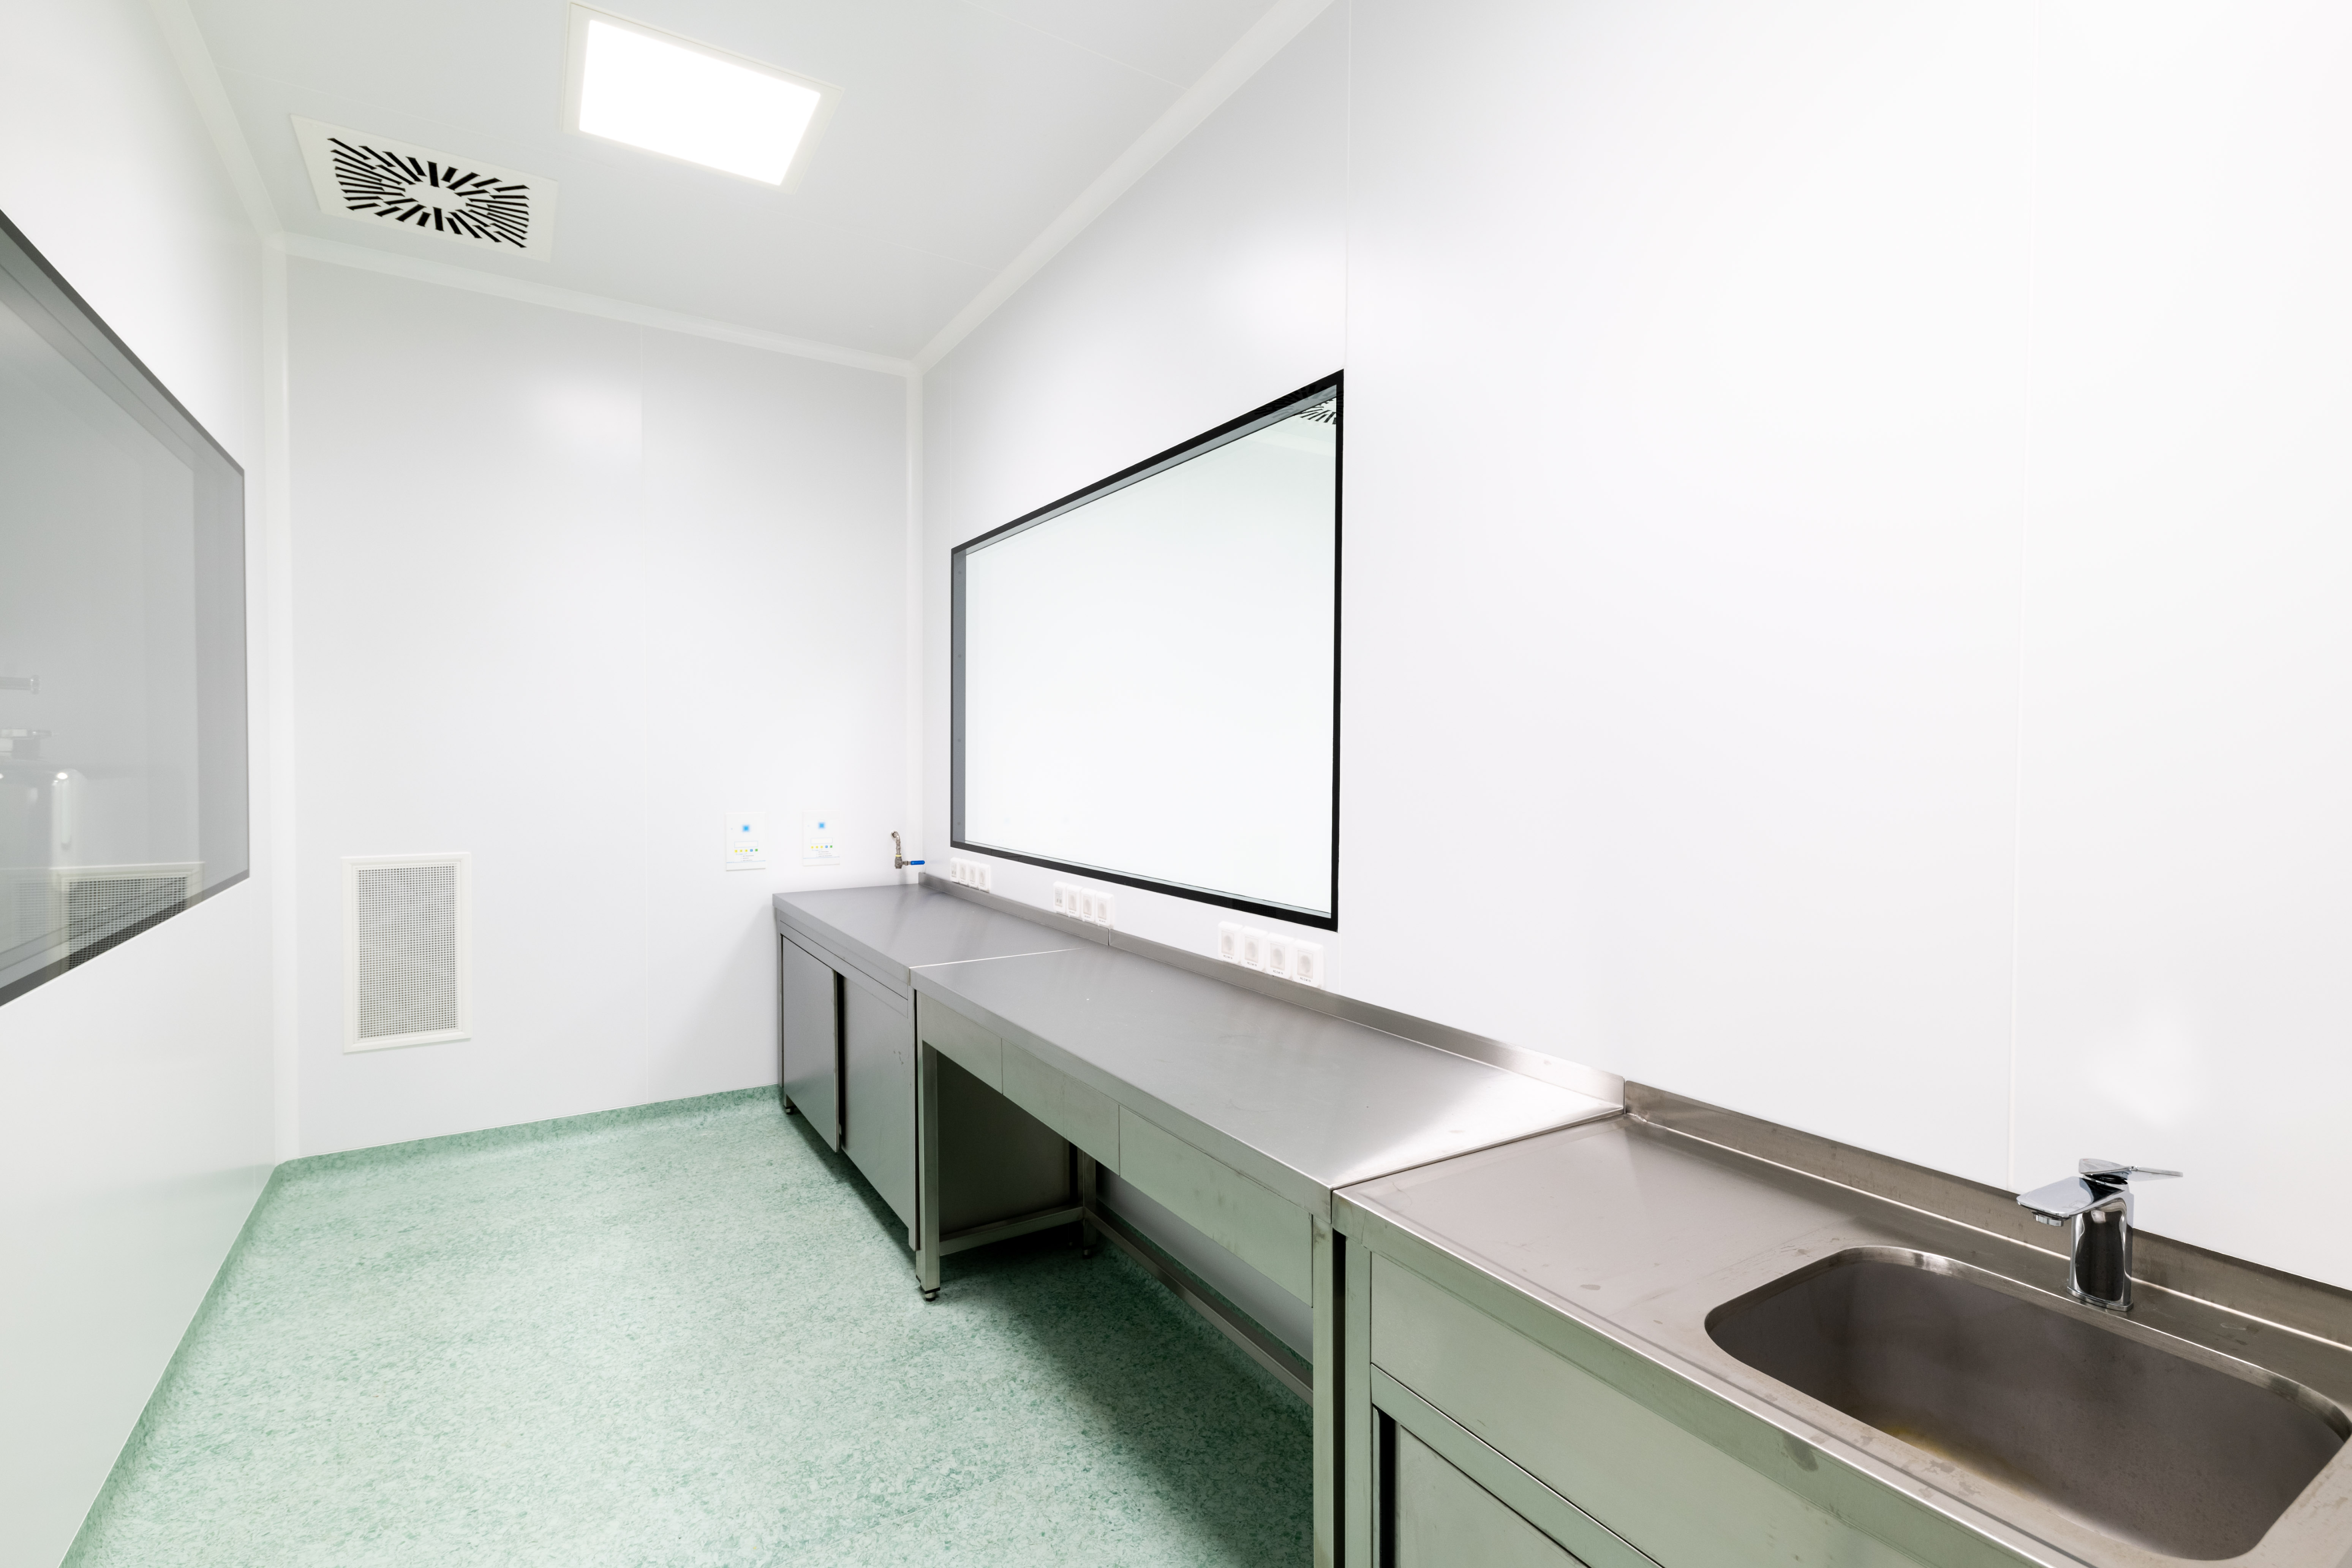 Termovent completes Class D cleanroom for supplement provider